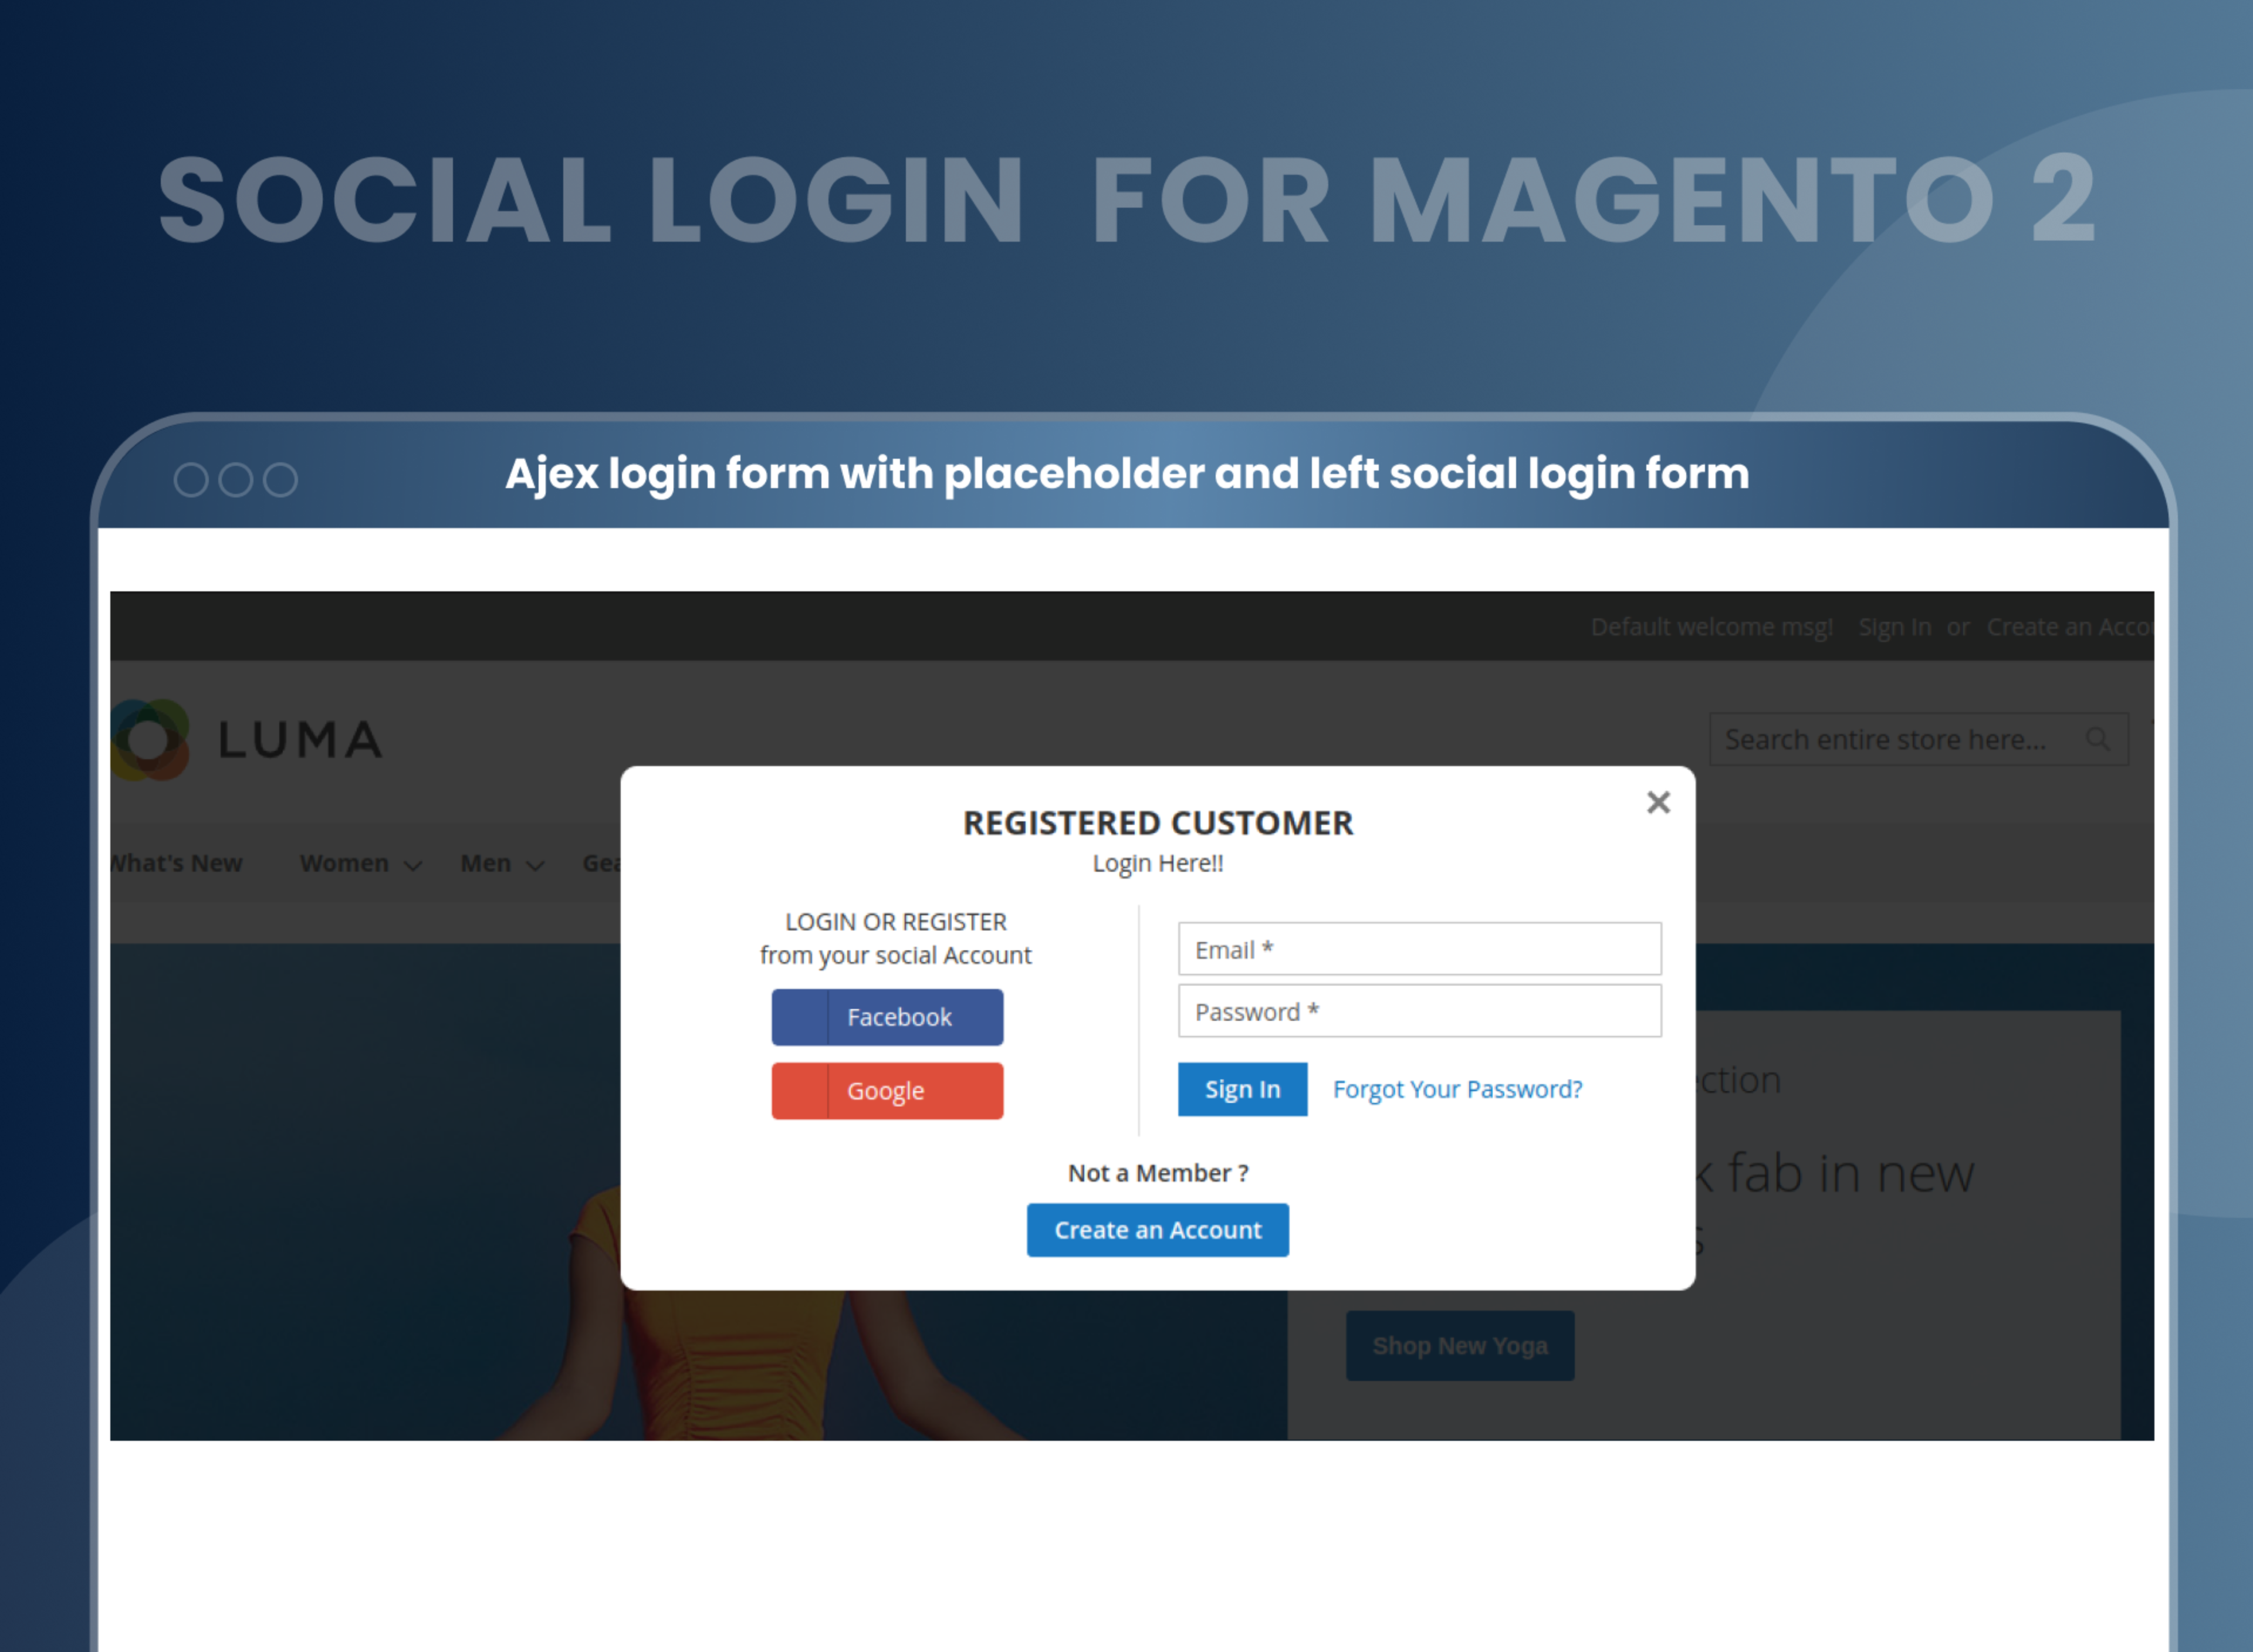 Ajex login form with placeholder and left social login form